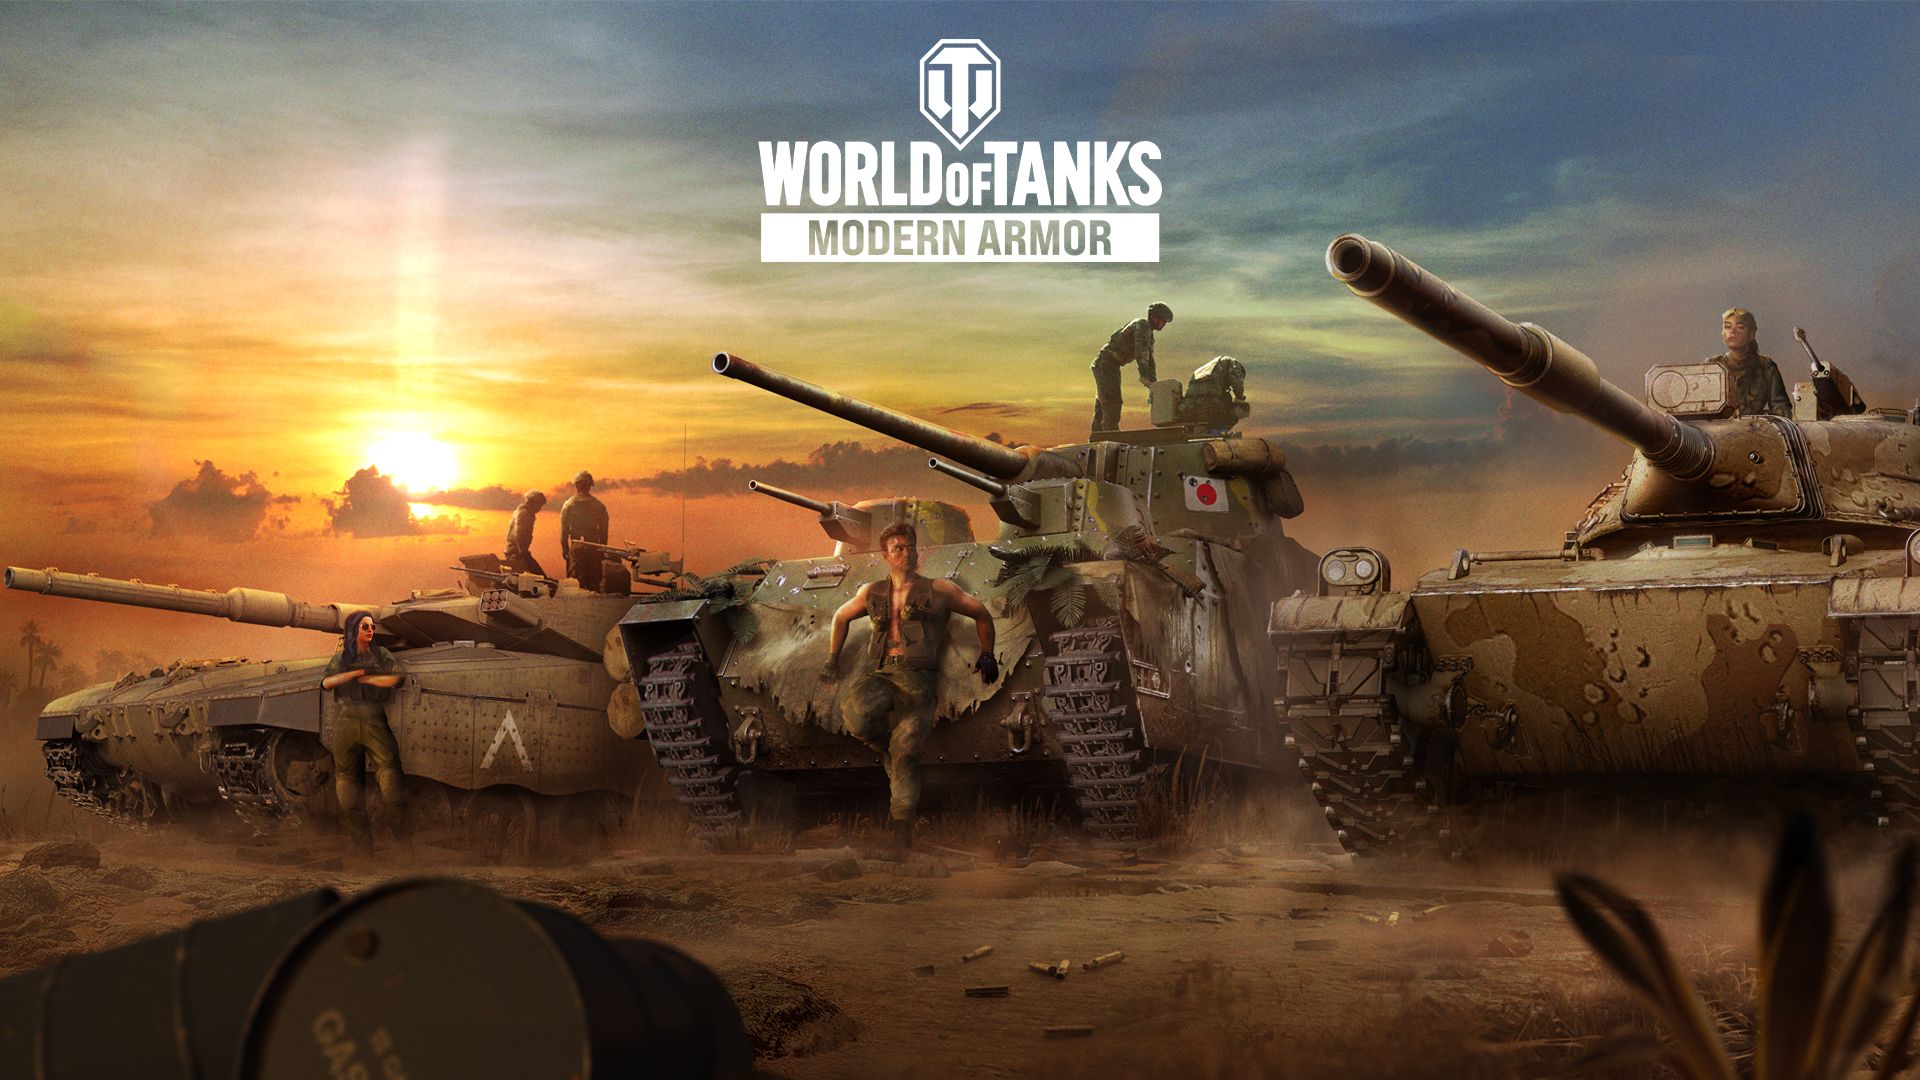 World of Tanks - World of Tanks added a new photo.